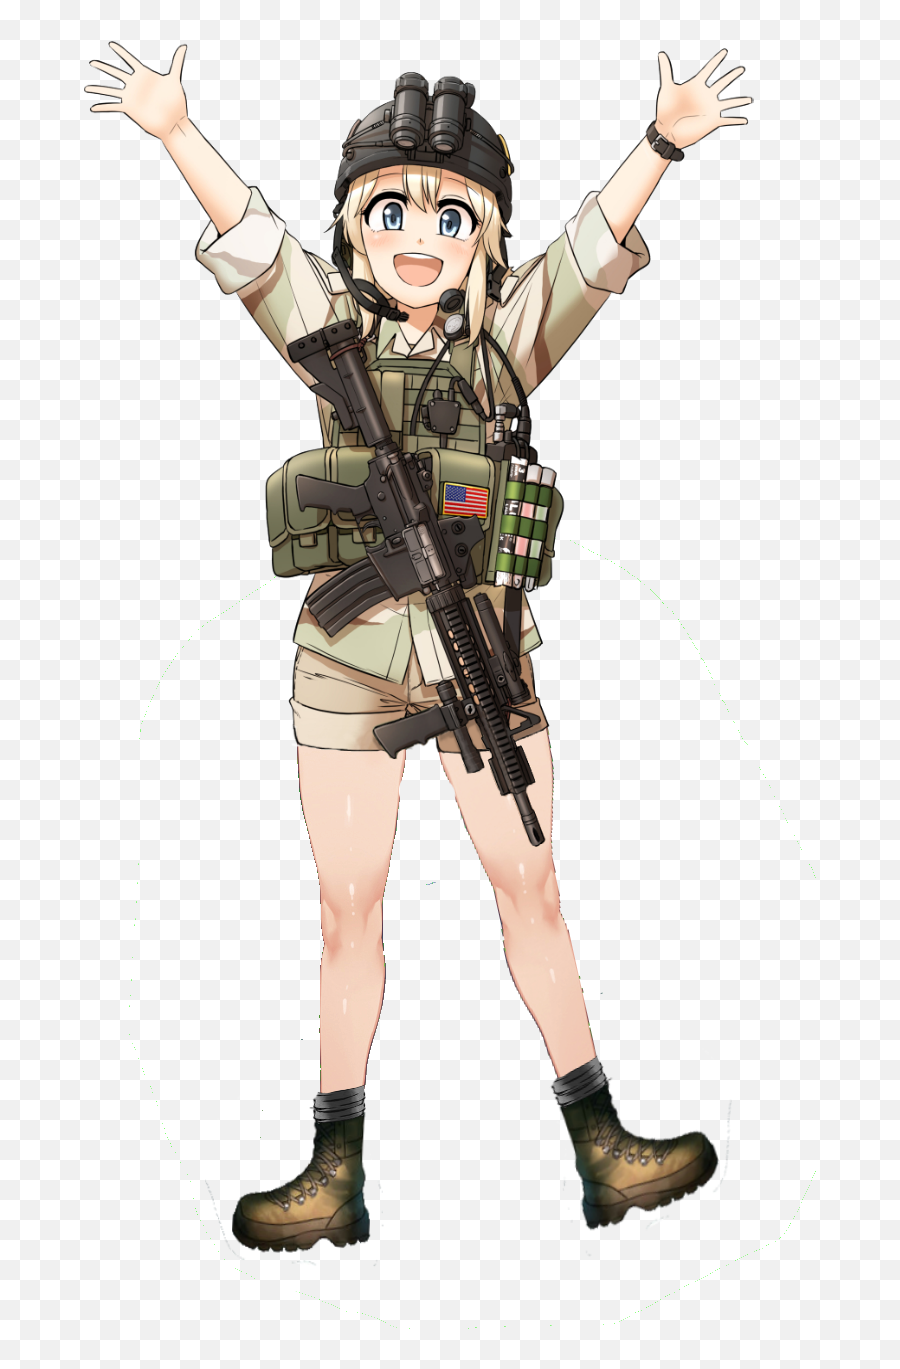 Requesting All Of Your Operator Chanu0027s Especially That One - Operator Chan Emoji,Emotion Anine